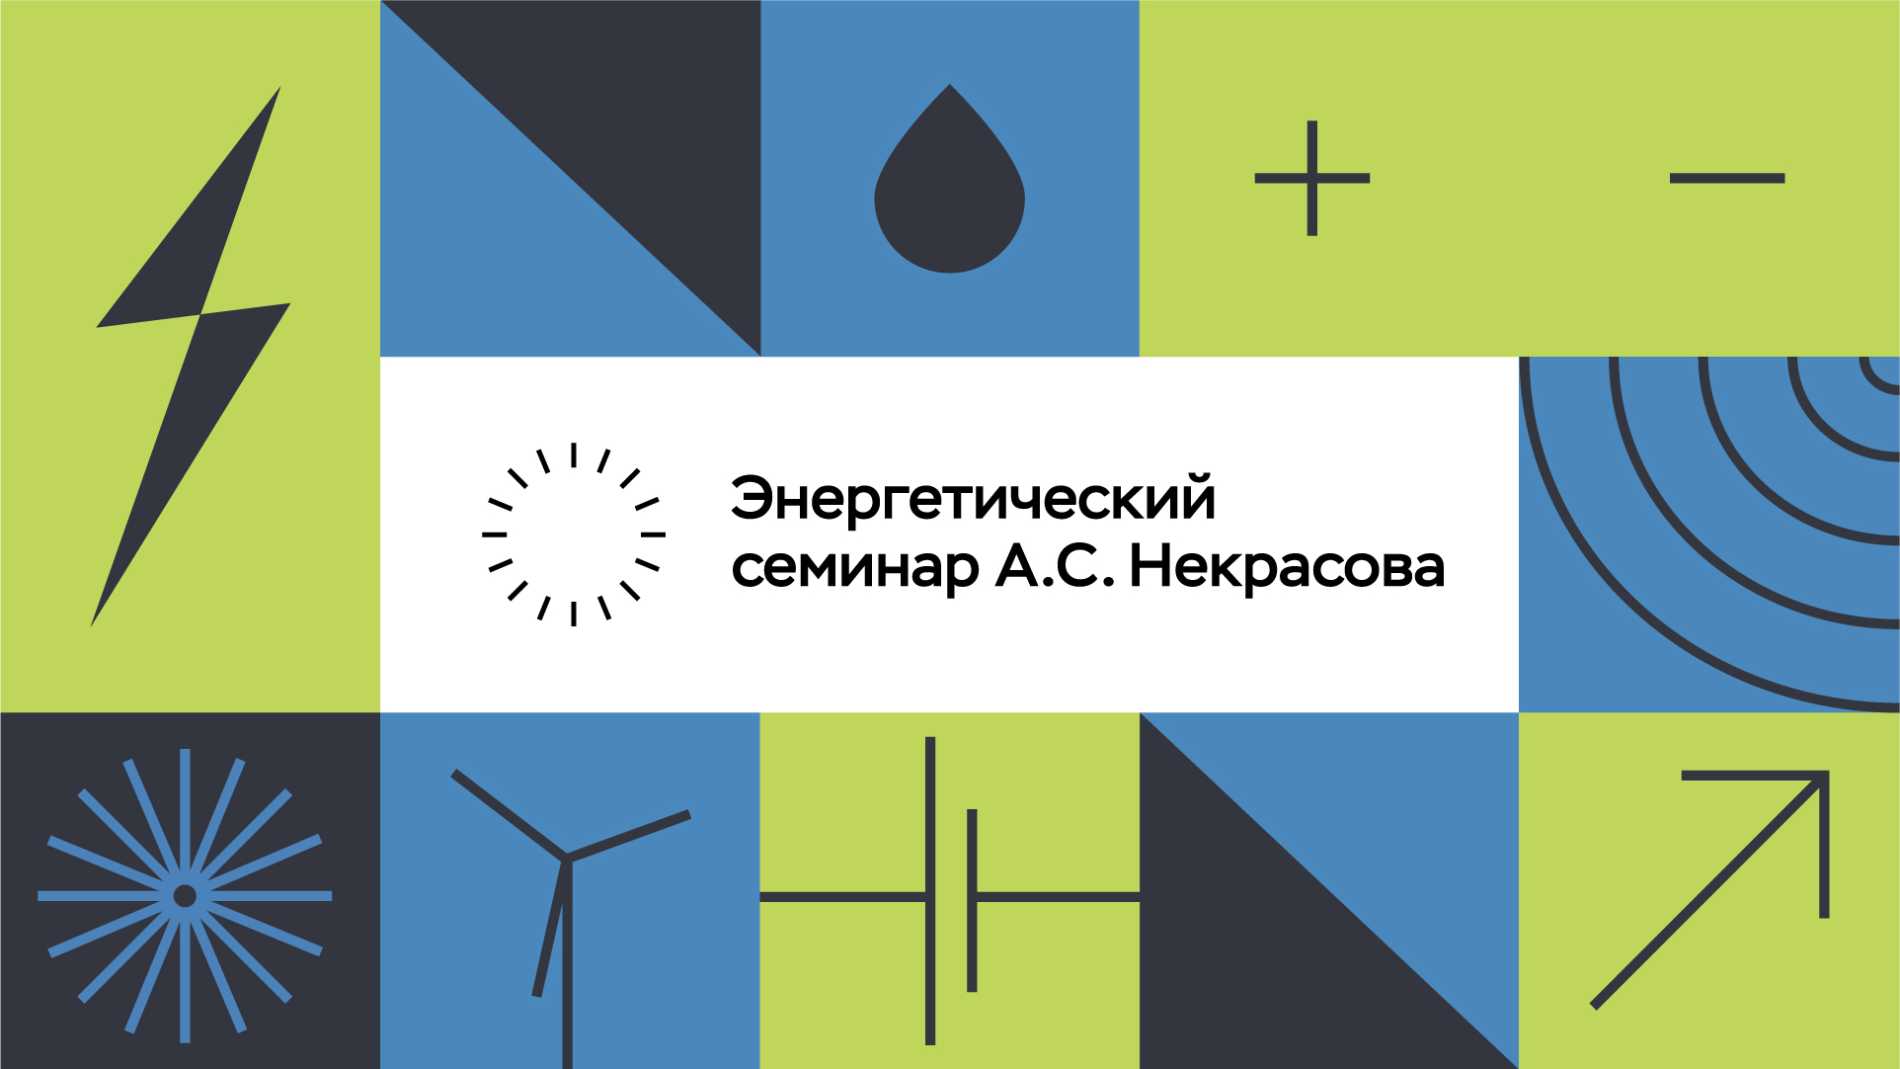 Foreign member of the RAS, senior researcher at the CIRETEC-GT laboratory Askar Akaevich Akaev will make a presentation at the Energy Seminar A.S. Nekrasov at the Institute of Economic Forecasting of the Russian Academy of Sciences